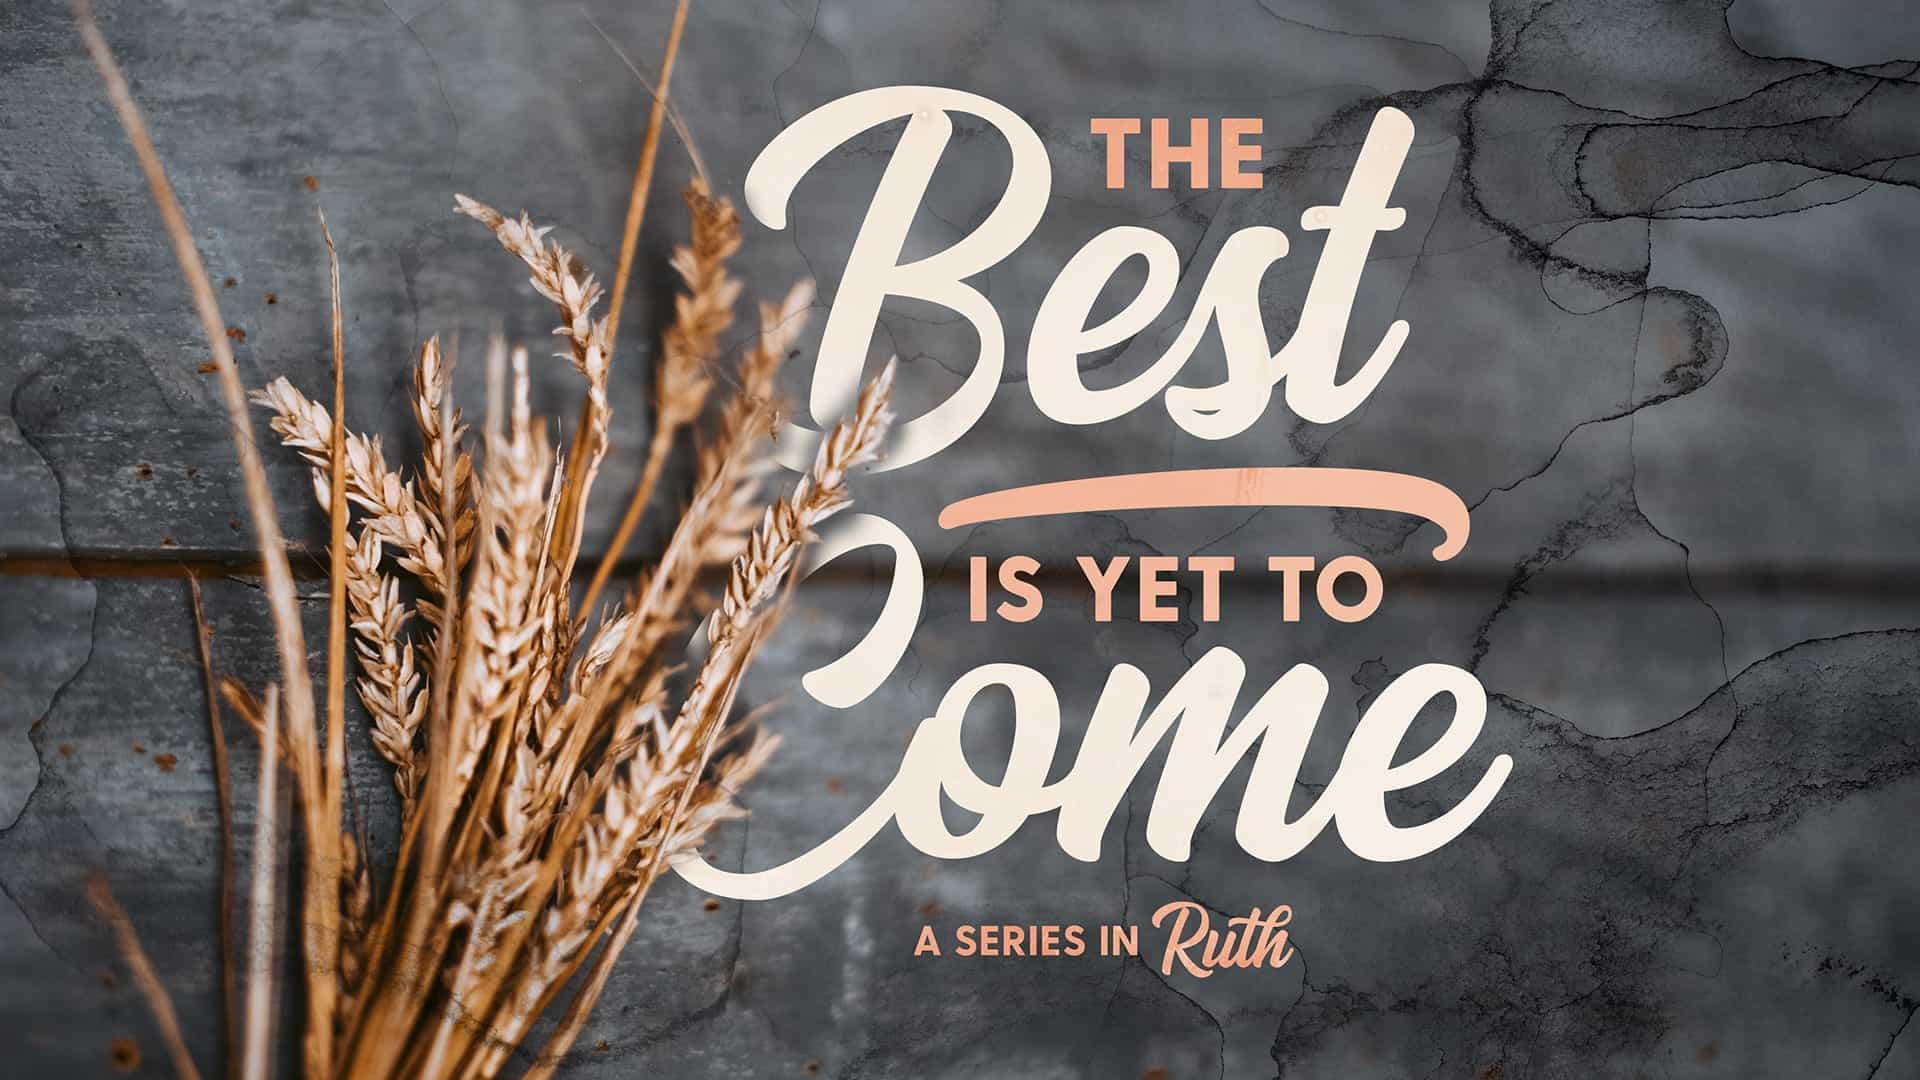 The Best is Yet to Come: Avoid the wrong ending, be redeemed by Christ! - 3/29/2020